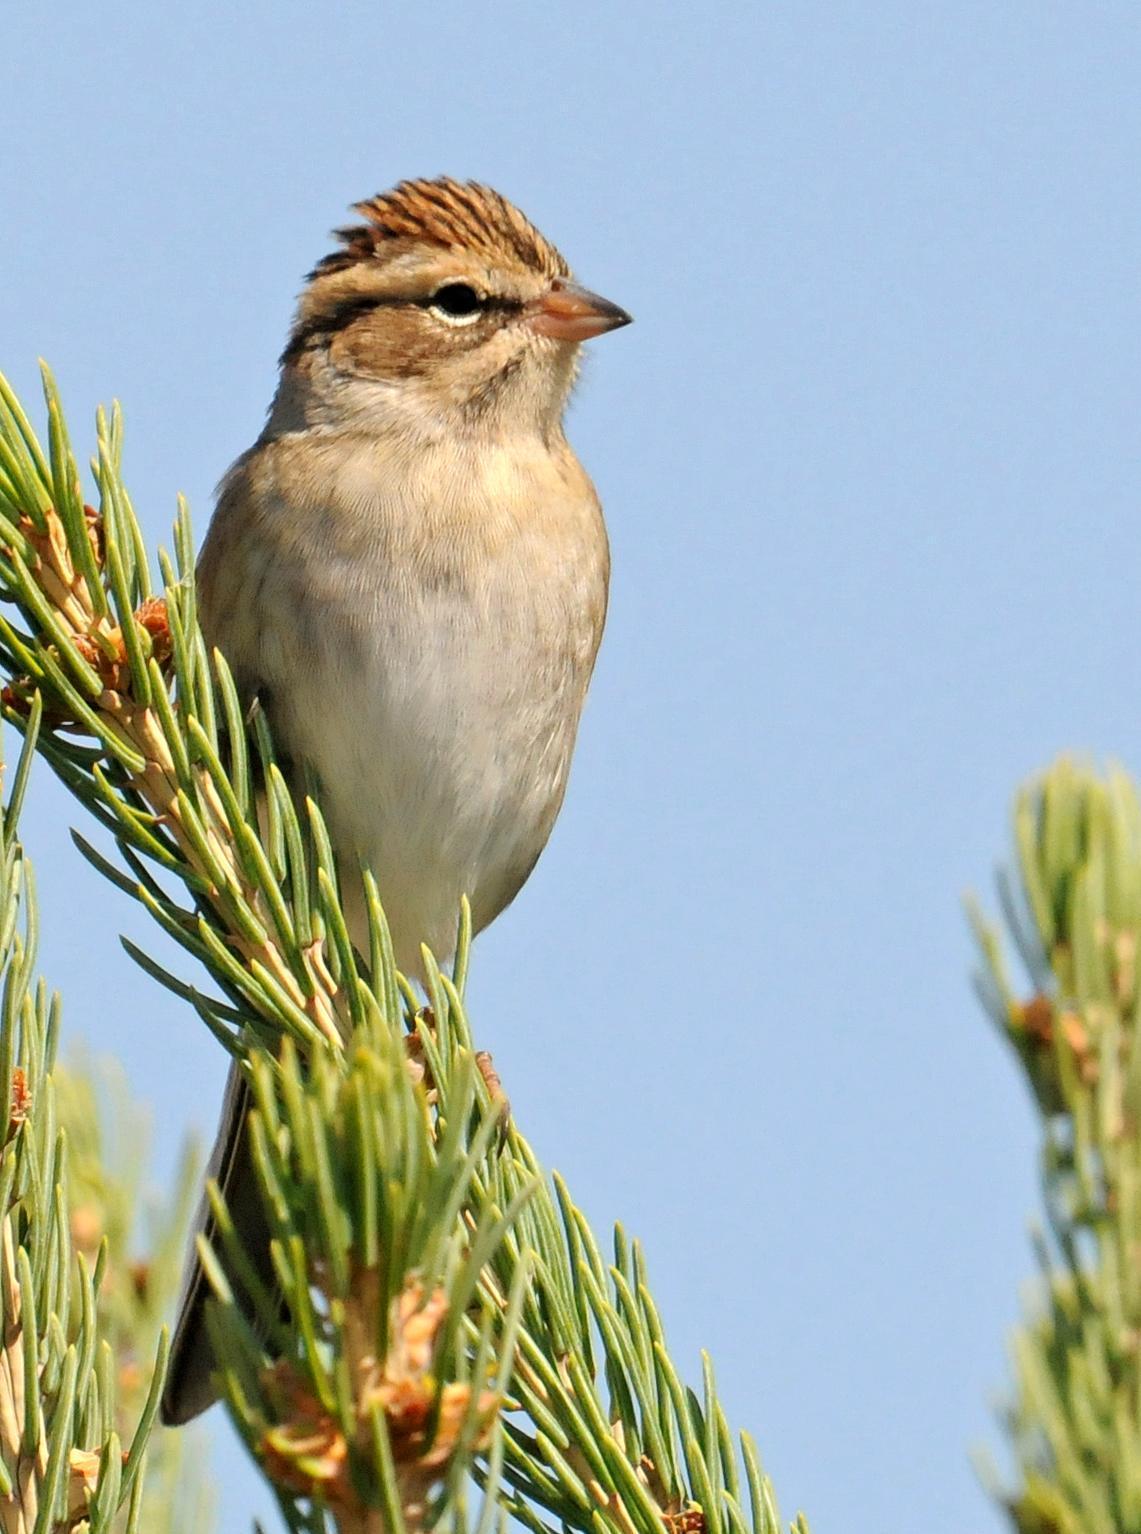 Chipping Sparrow Photo by Steven Mlodinow